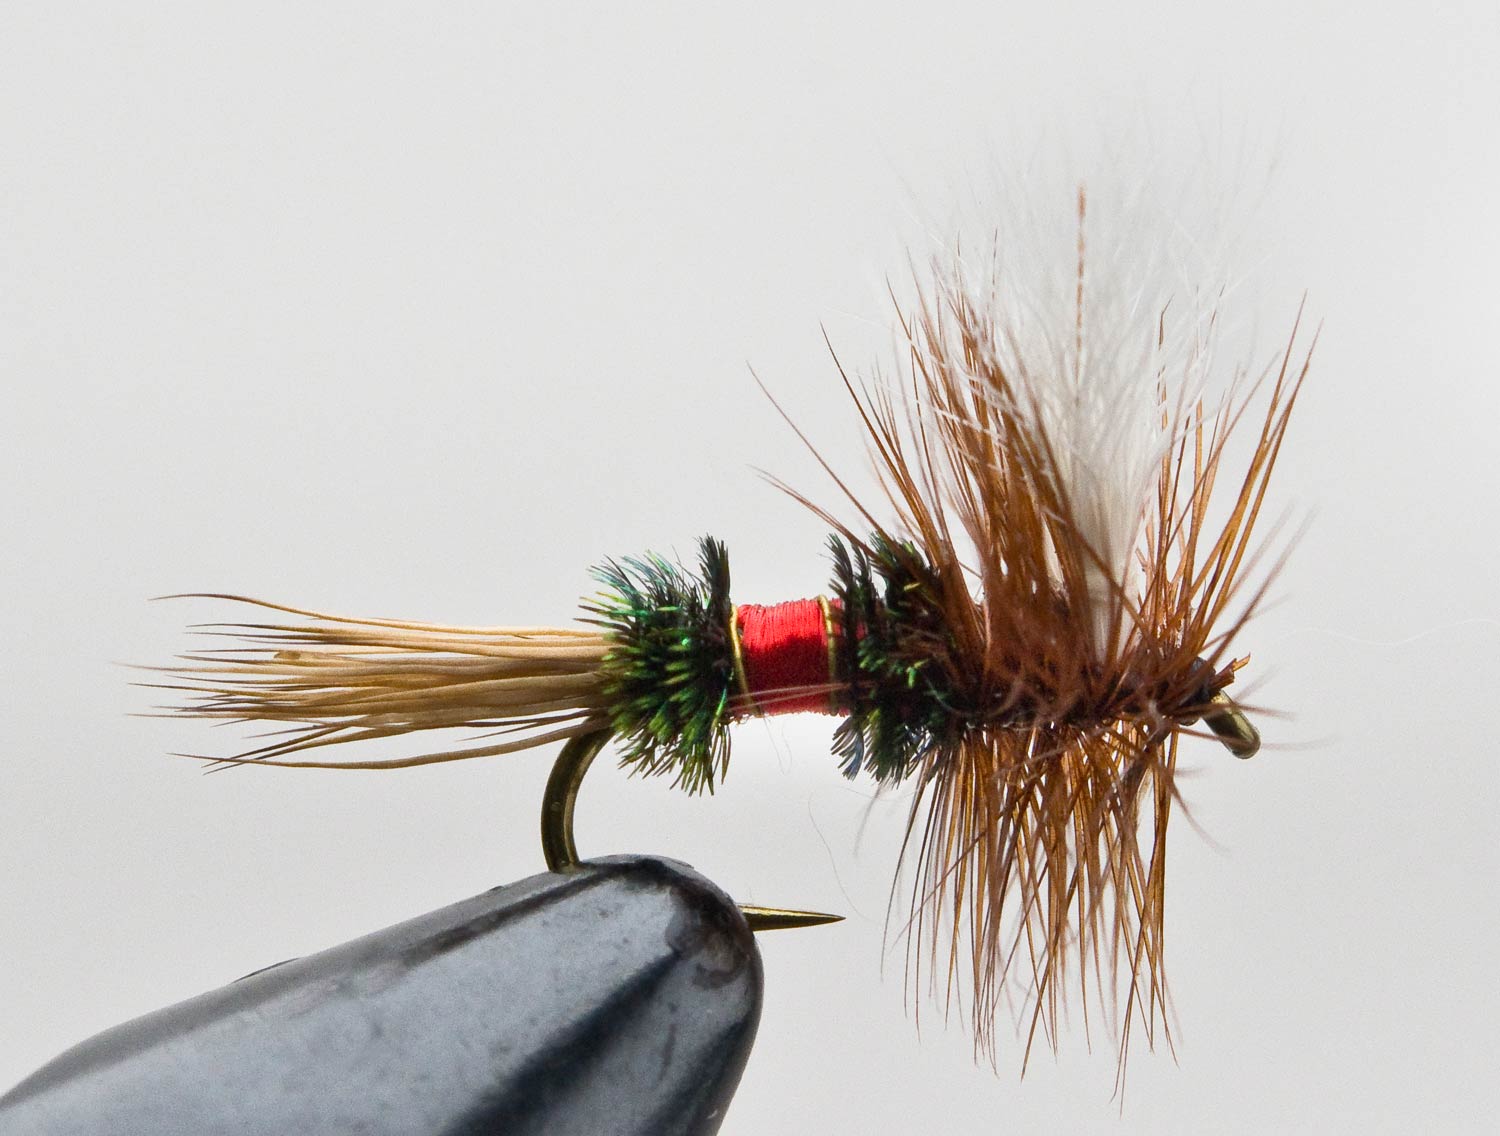 antique flies, Fly Fishing, Gink and Gasoline, How to Fly Fish, Trout  Fishing, Fly Tying